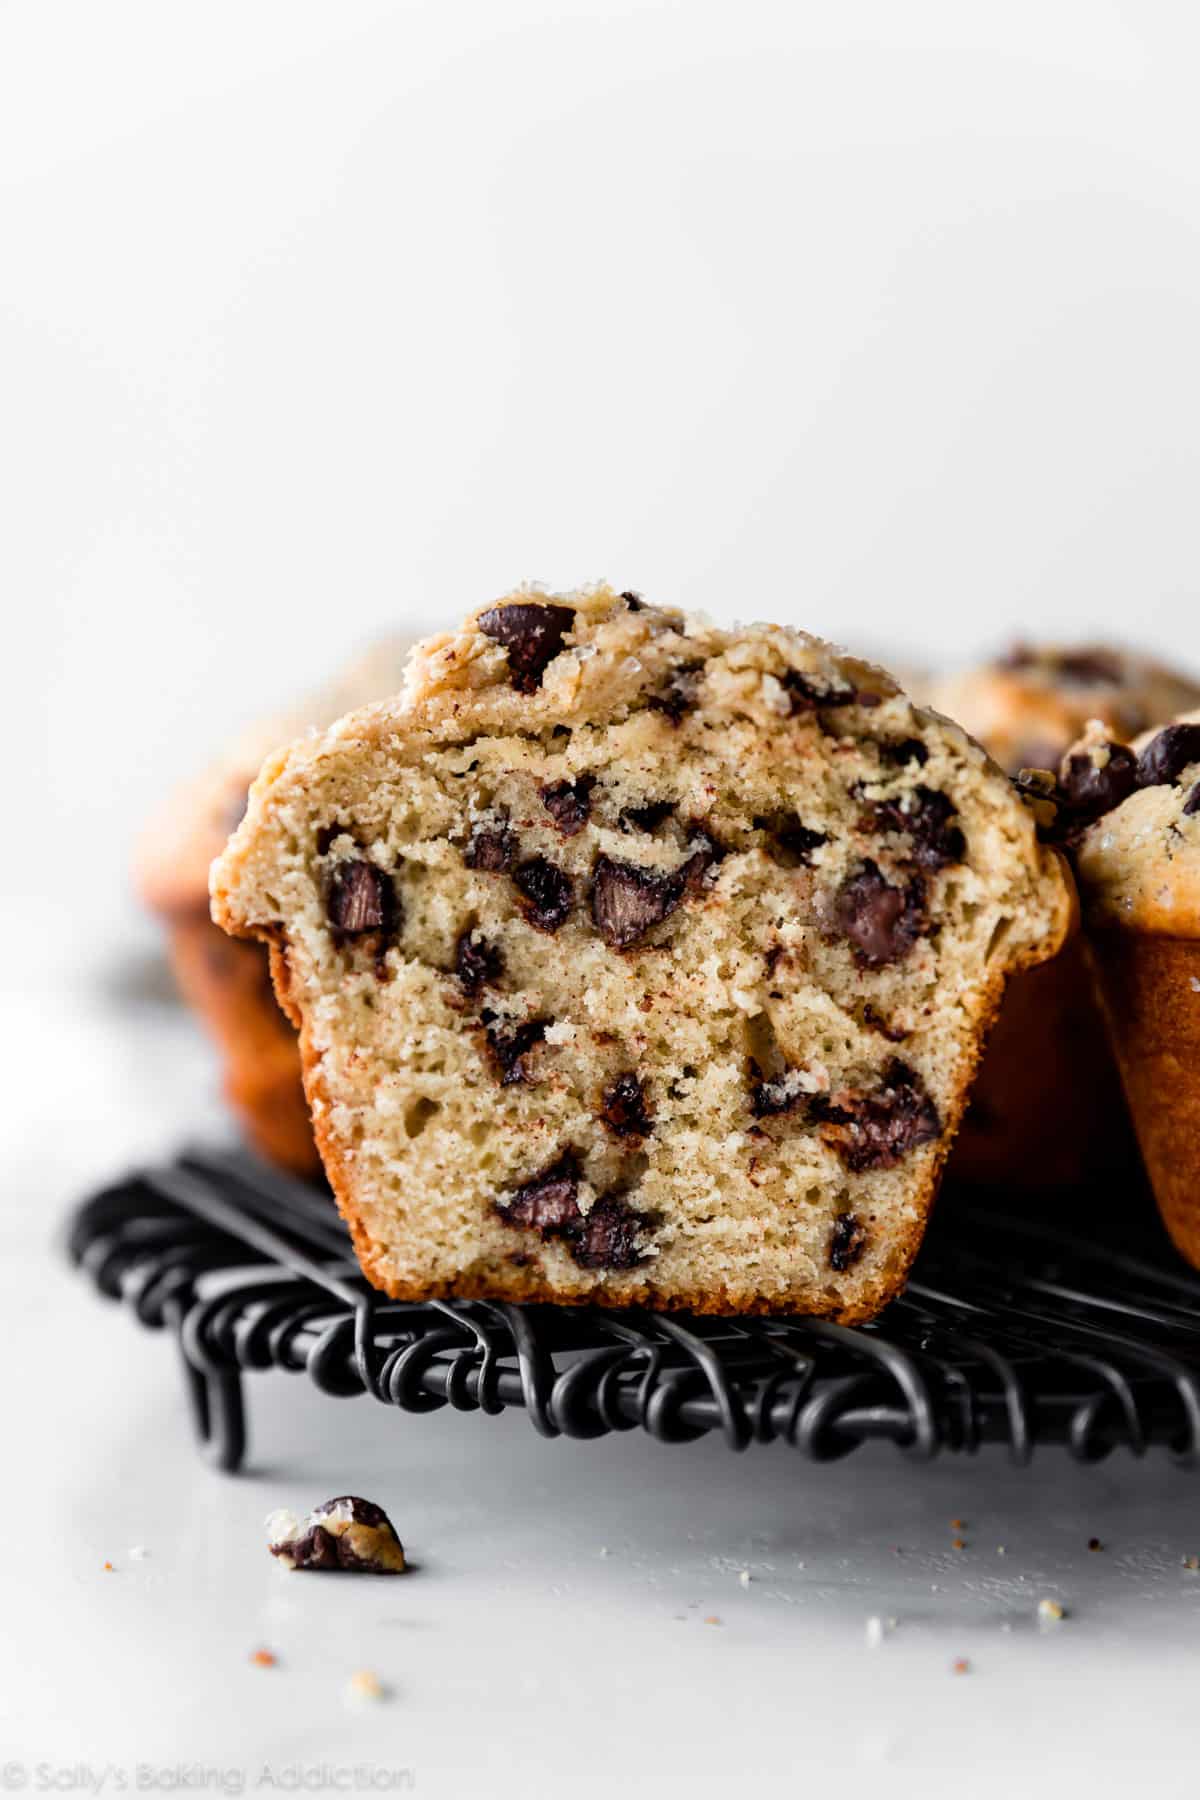 Bakery style chocolate chip muffin cut in half showing chocolate chips